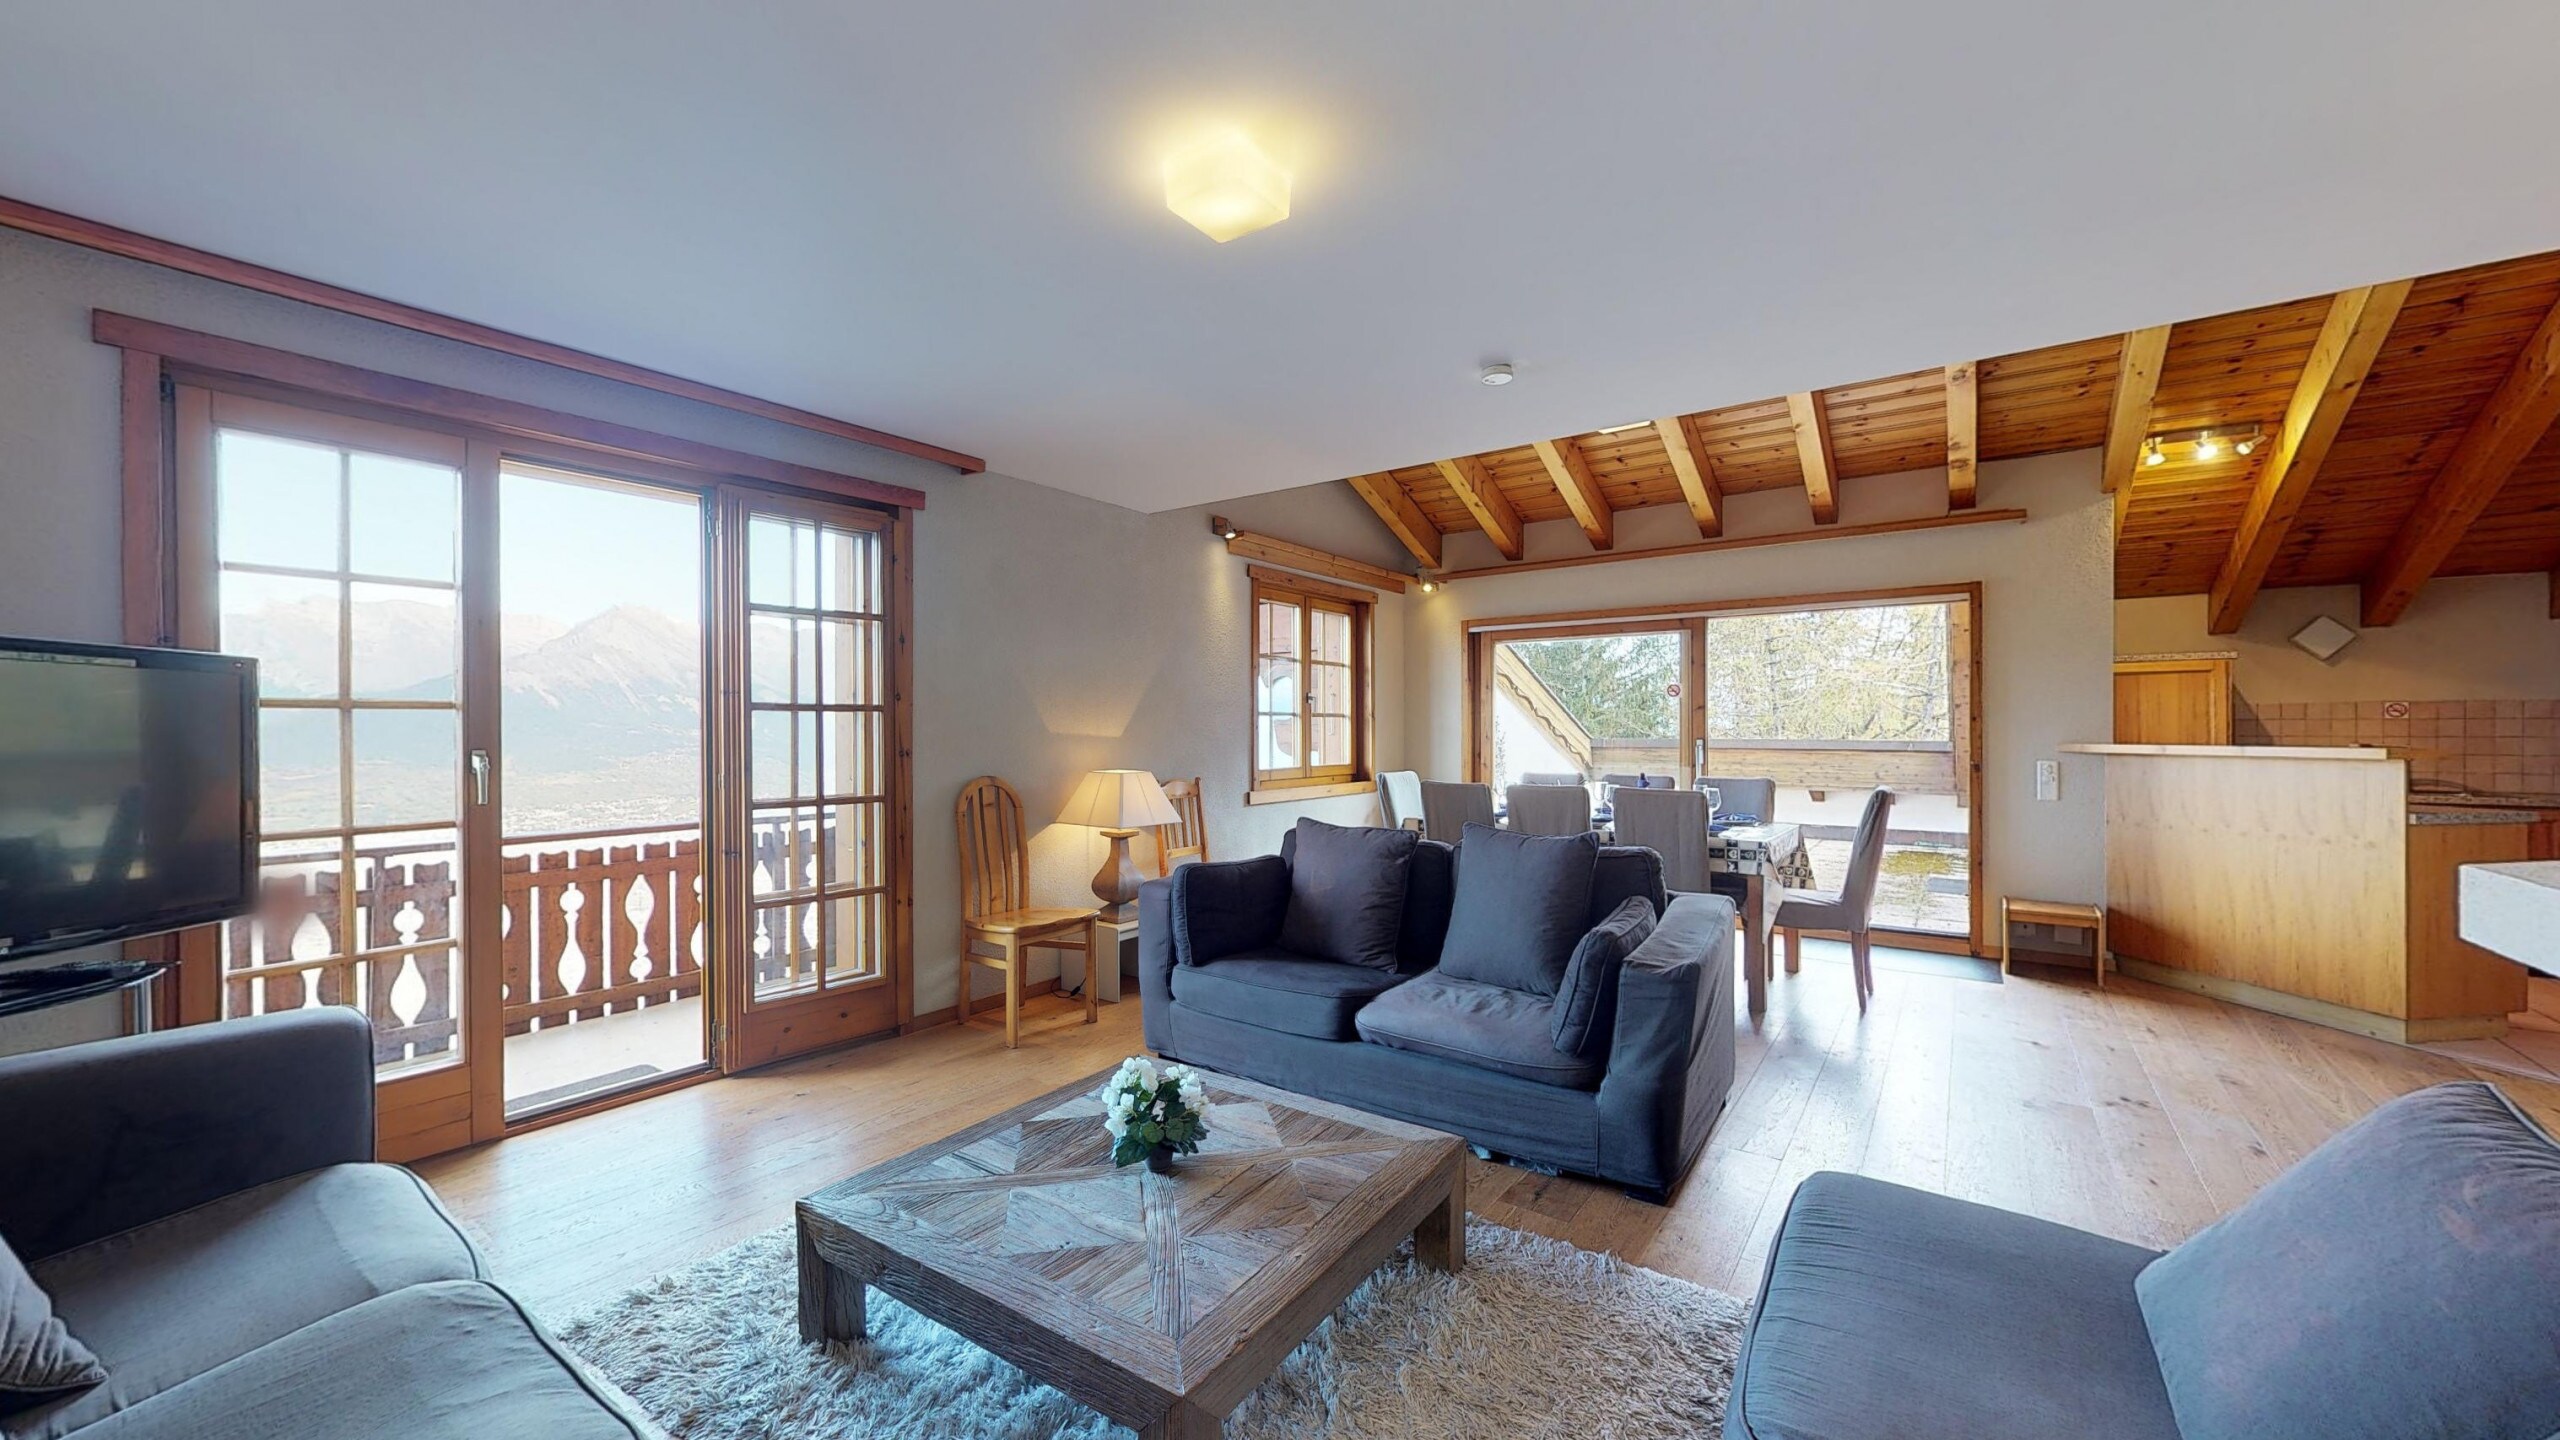 Property Image 1 - Sublime Home with Fireplace and Pretty view of Valley